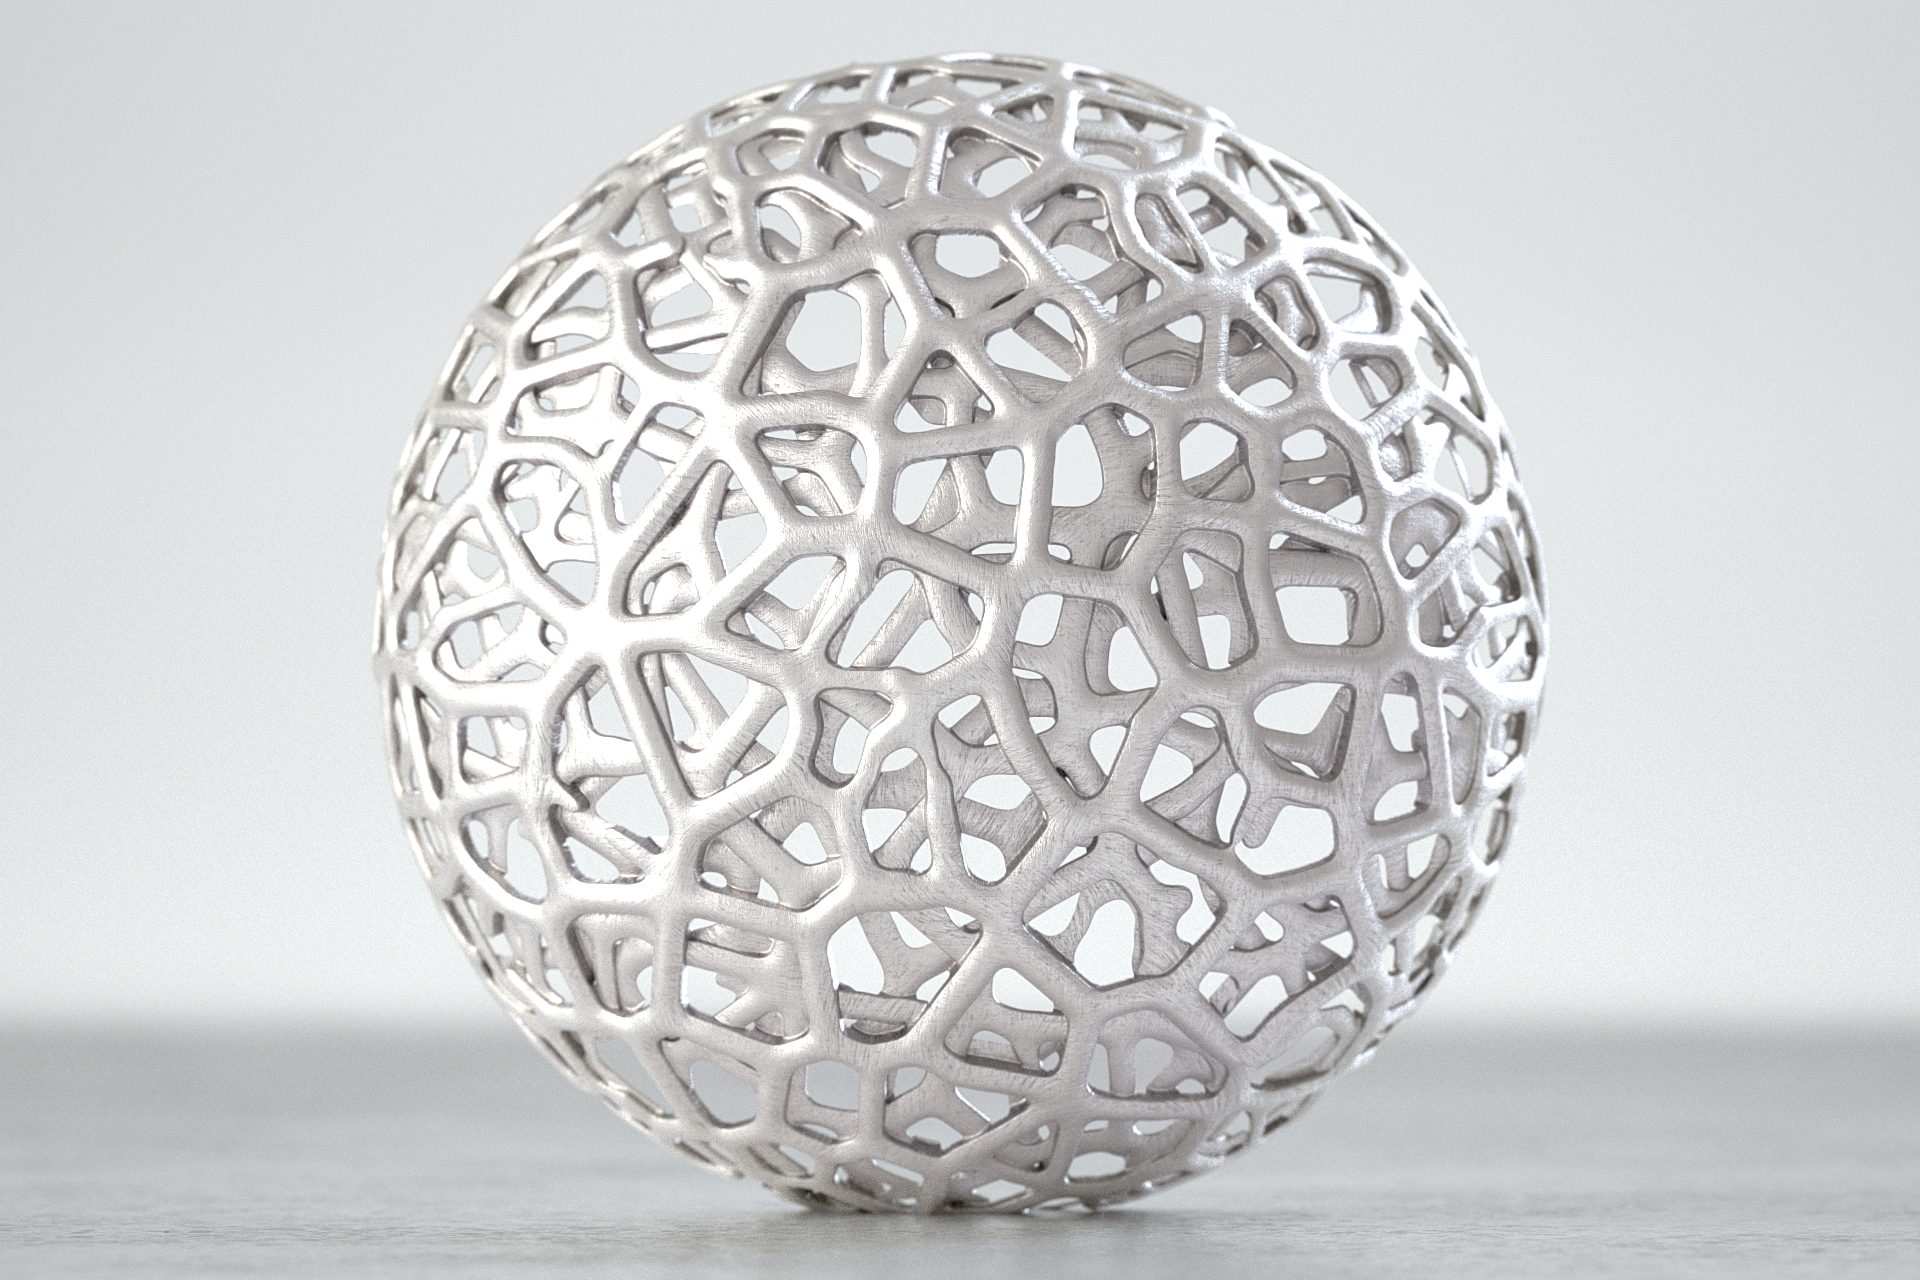 new-materials-to-help-visualize-3d-printed-objects-released-globalspec